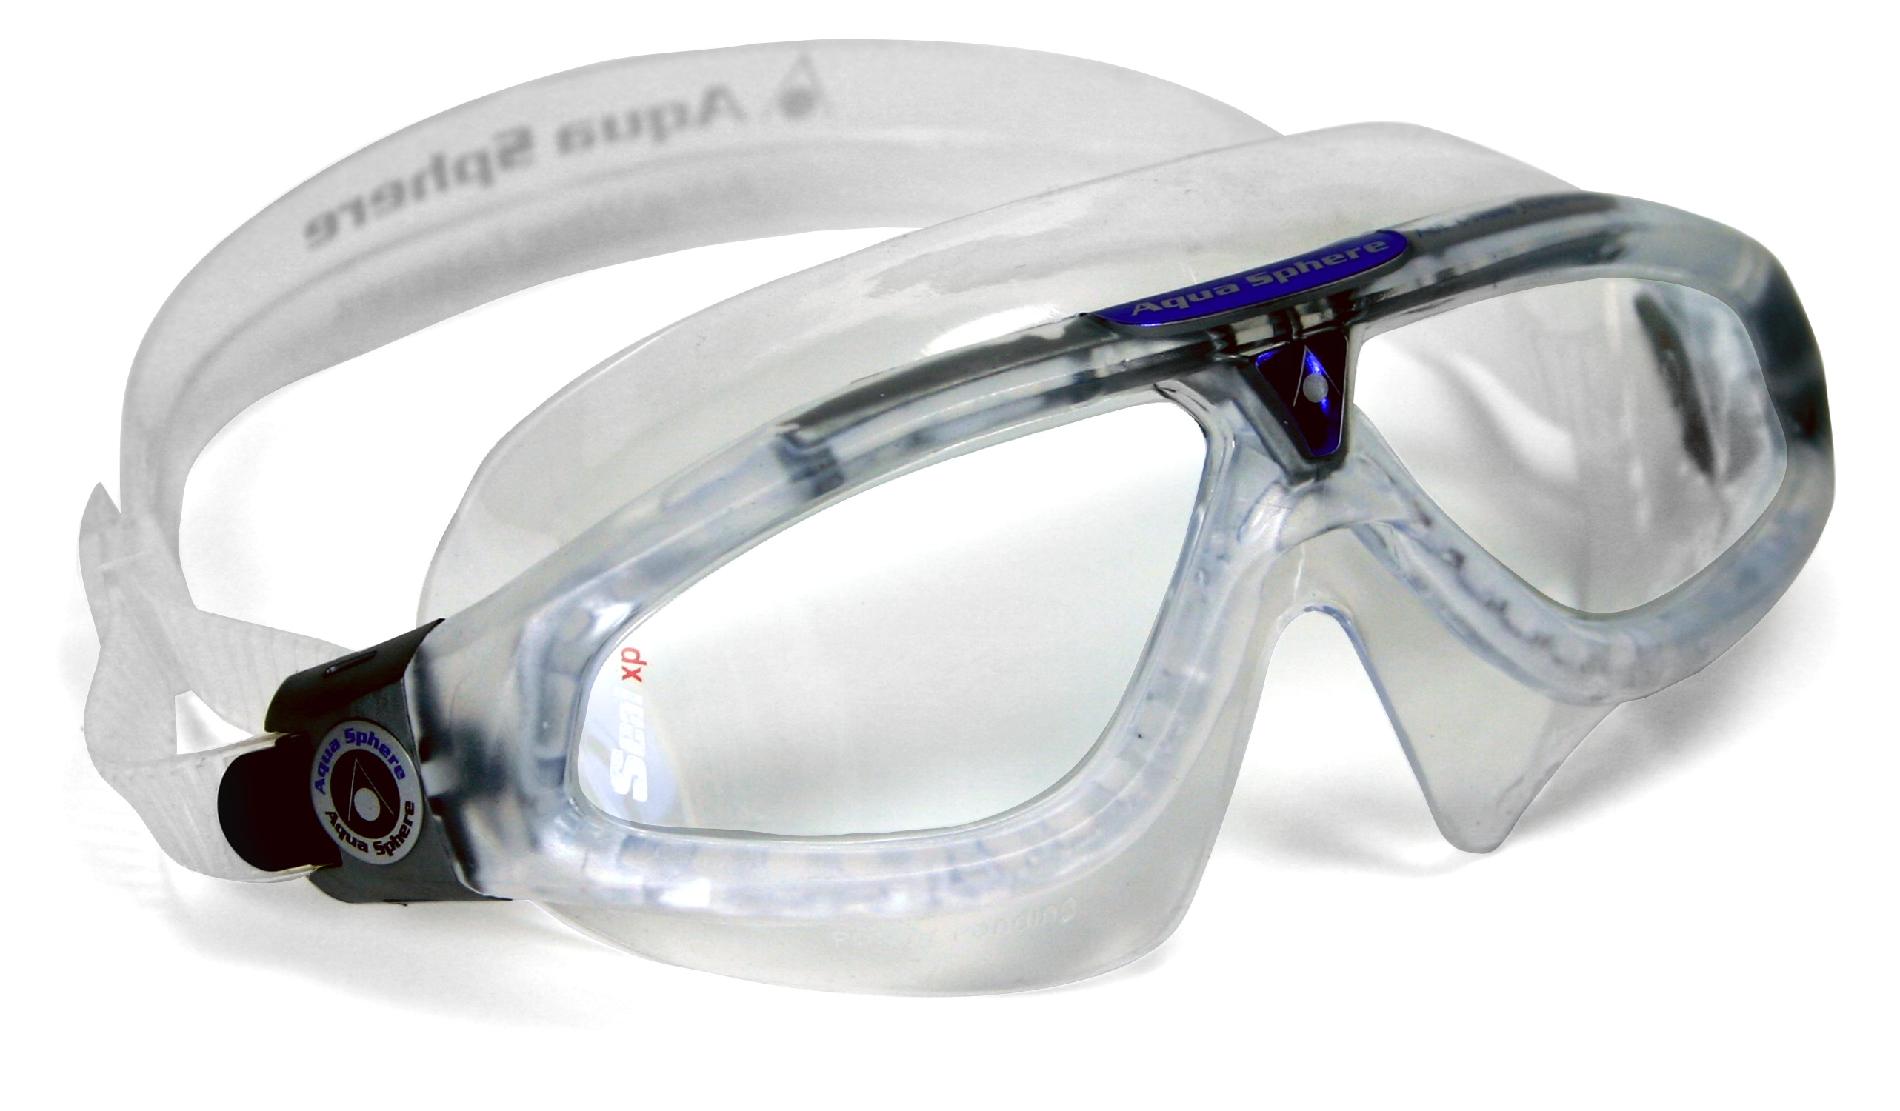 Seal XP Mask Clear Lens Blue